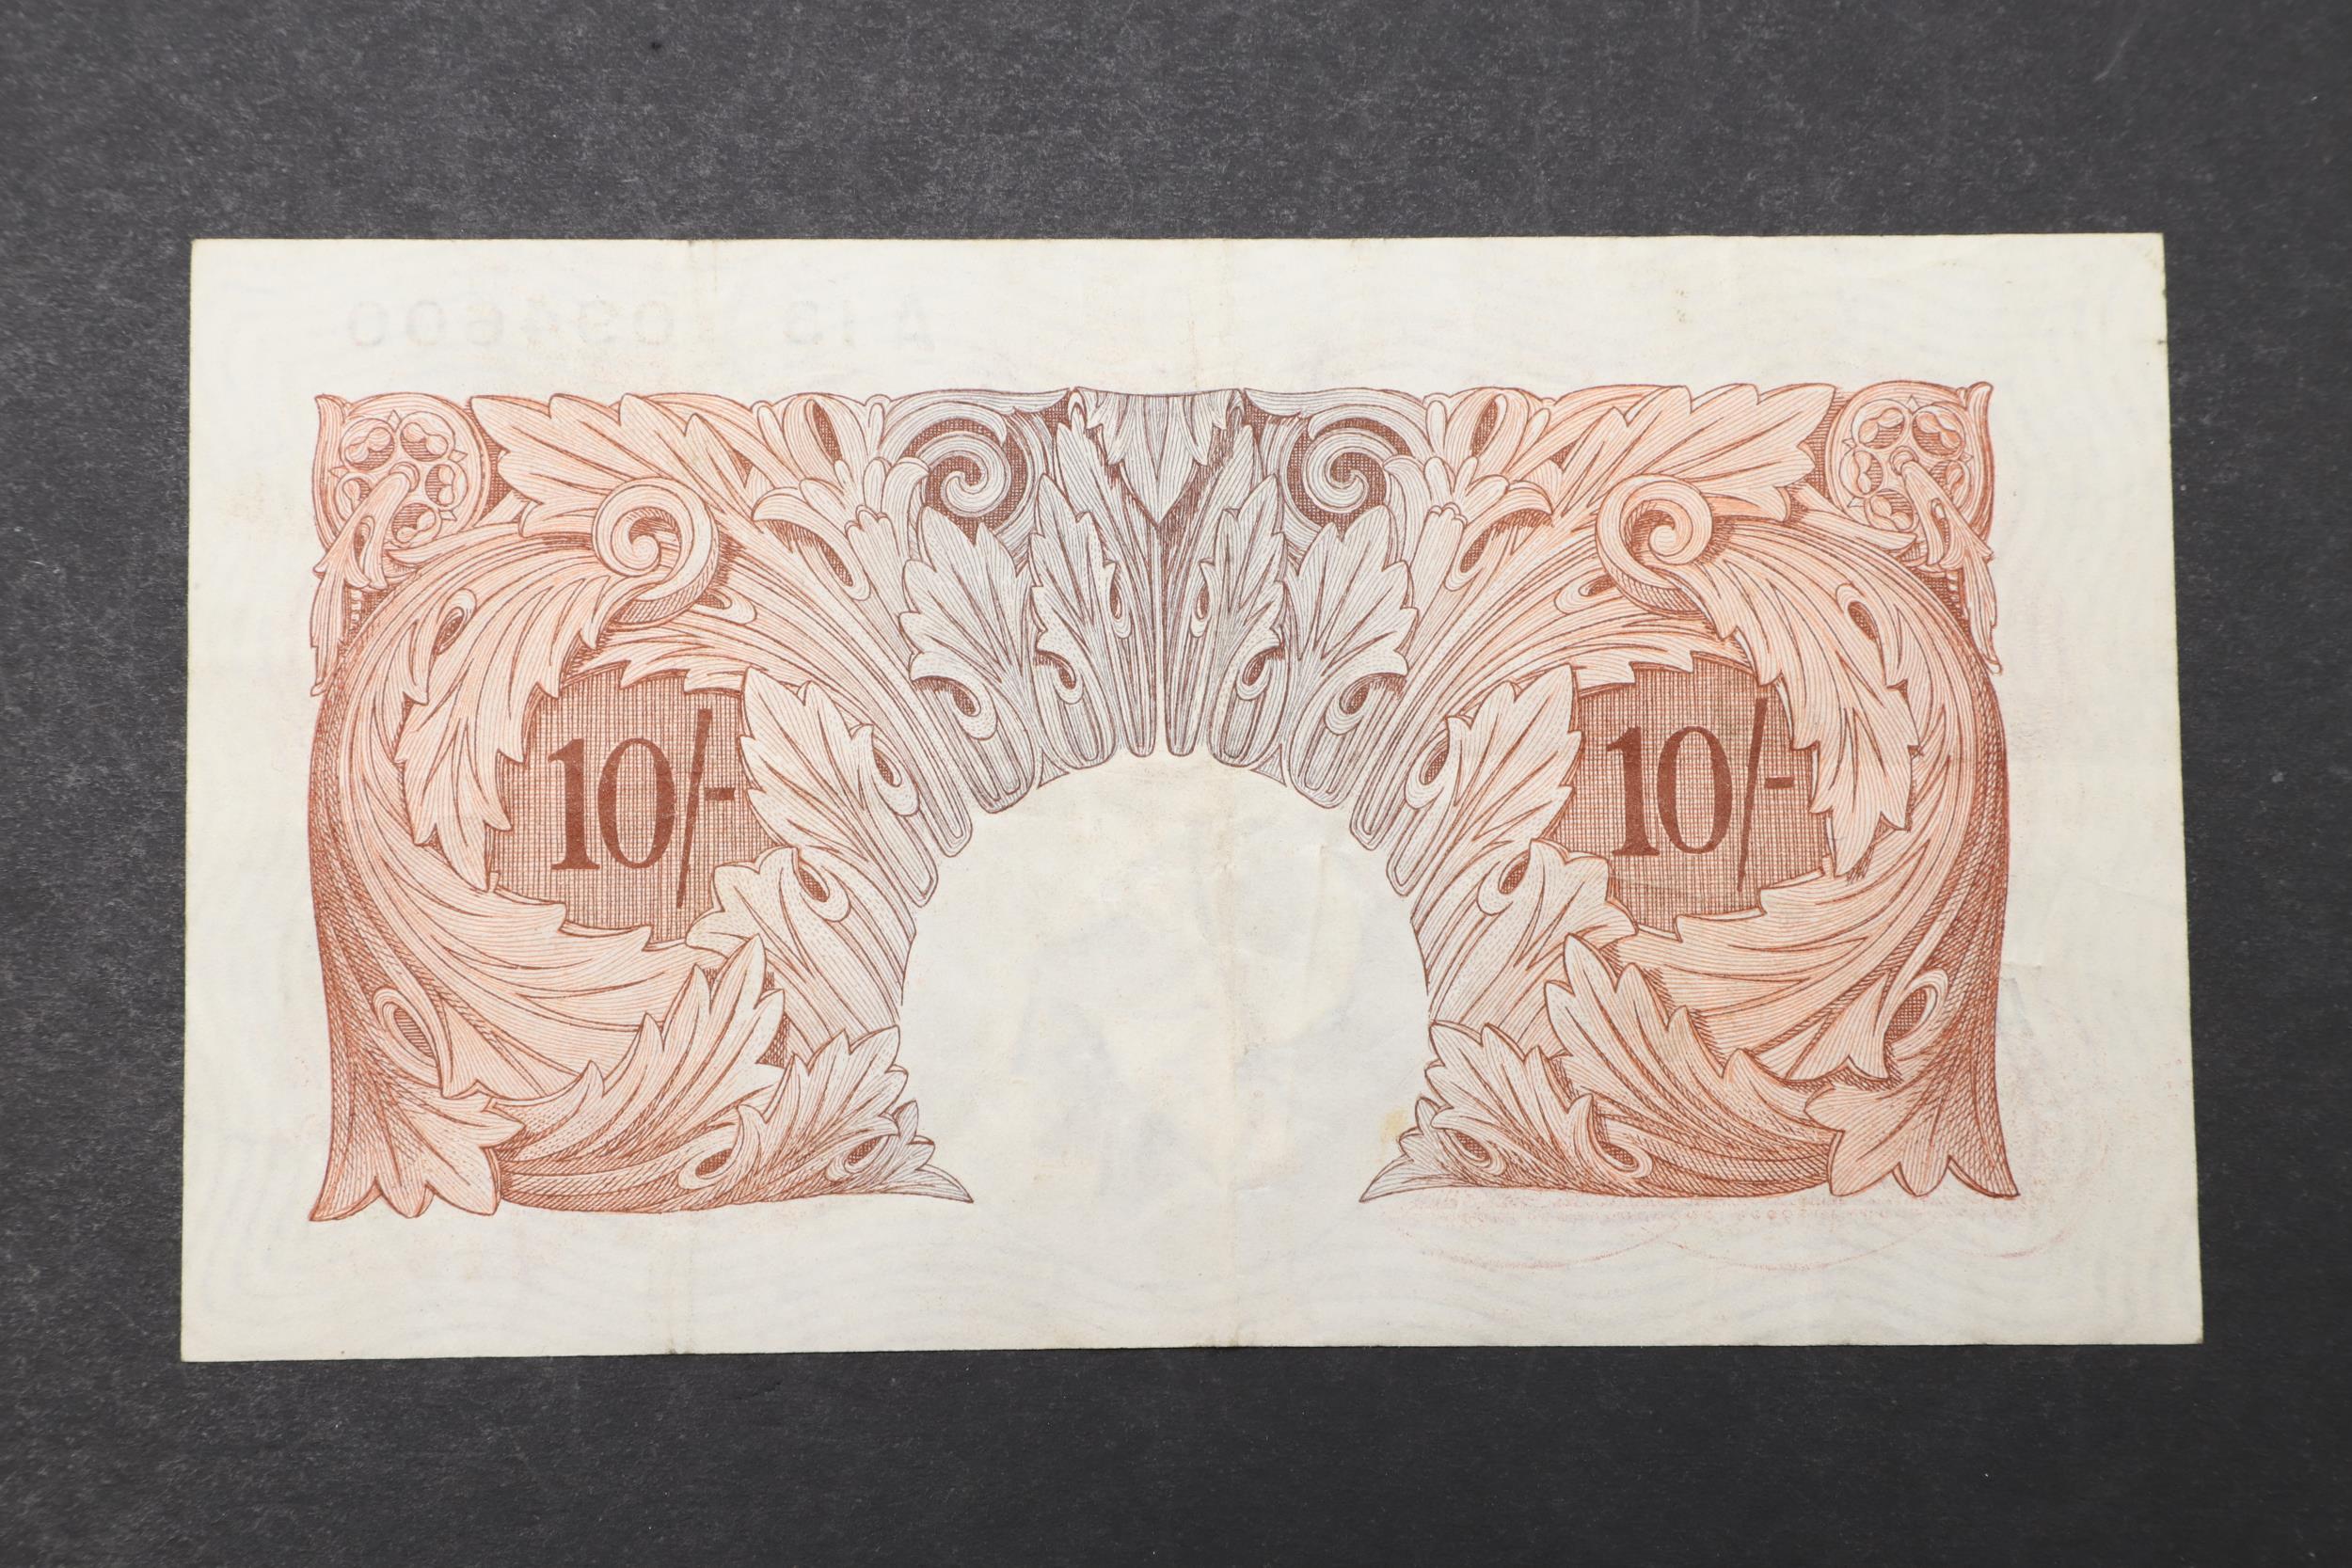 A BANK OF ENGLAND SERIES A TEN SHILLING BANKNOTE. - Image 2 of 2